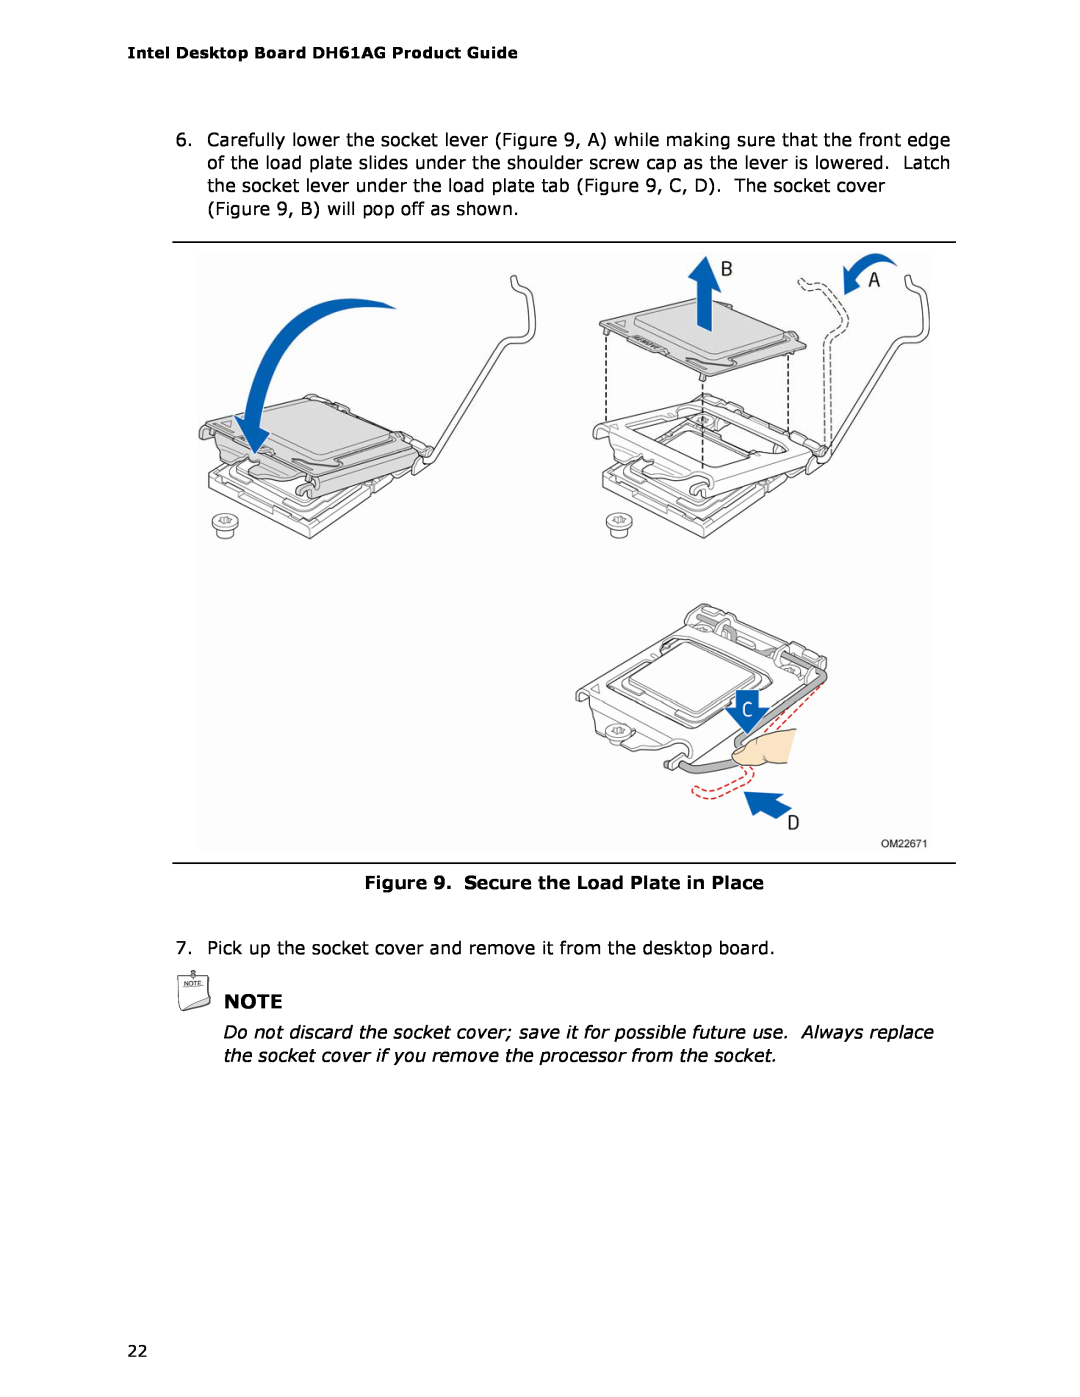 Intel BOXDH61AG manual Secure the Load Plate in Place 